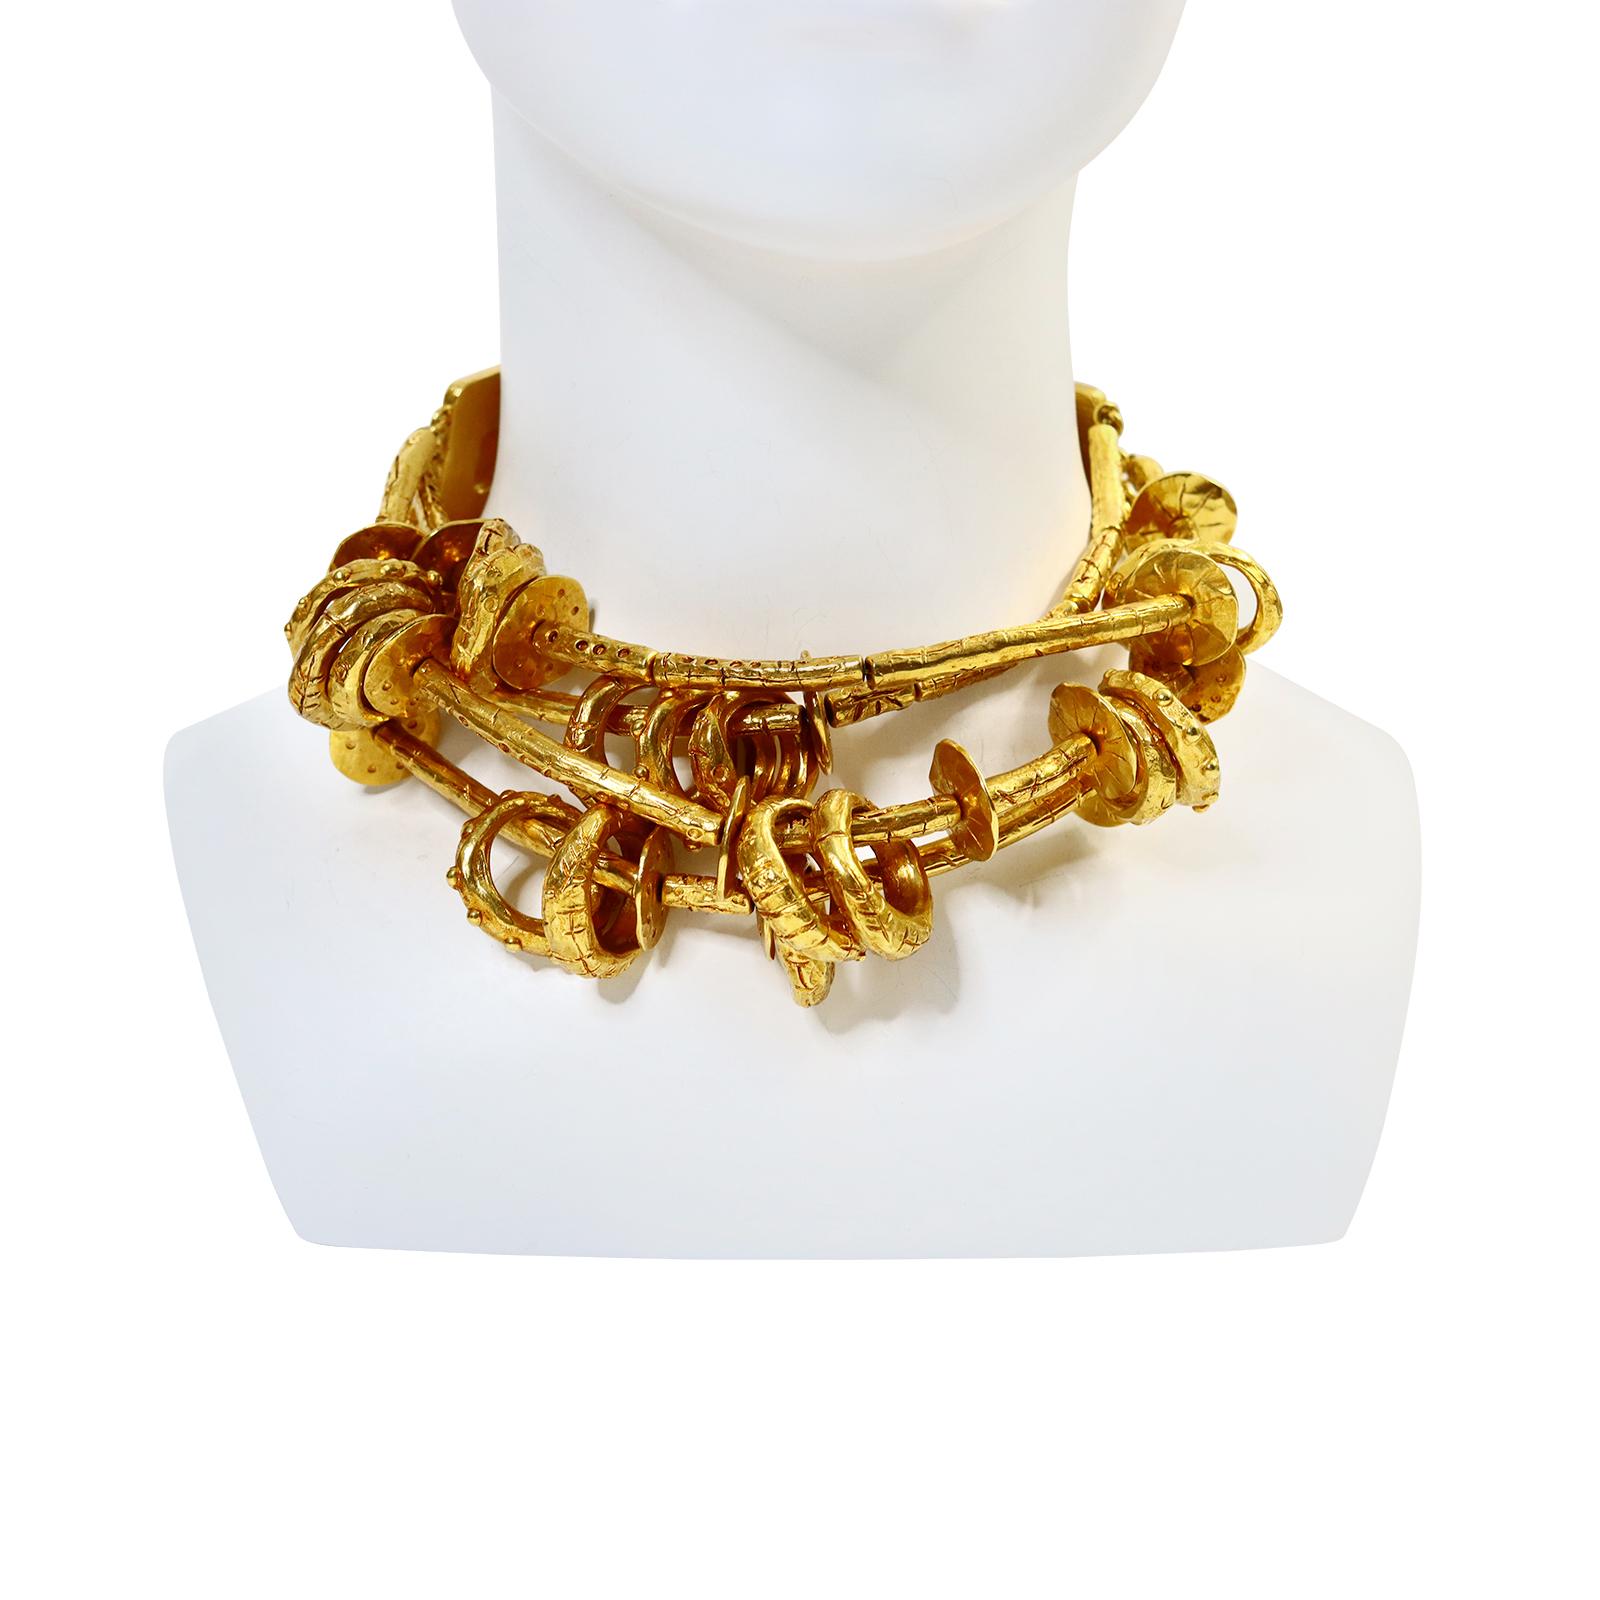 CHRISTIAN LACROIX vintage rare massive ethnic tribal inspired four strands gold toned choker necklace featuring links and rings. Both ends are made of deep red studded enamel embellished with orange resin cabochon. This is one of the special and